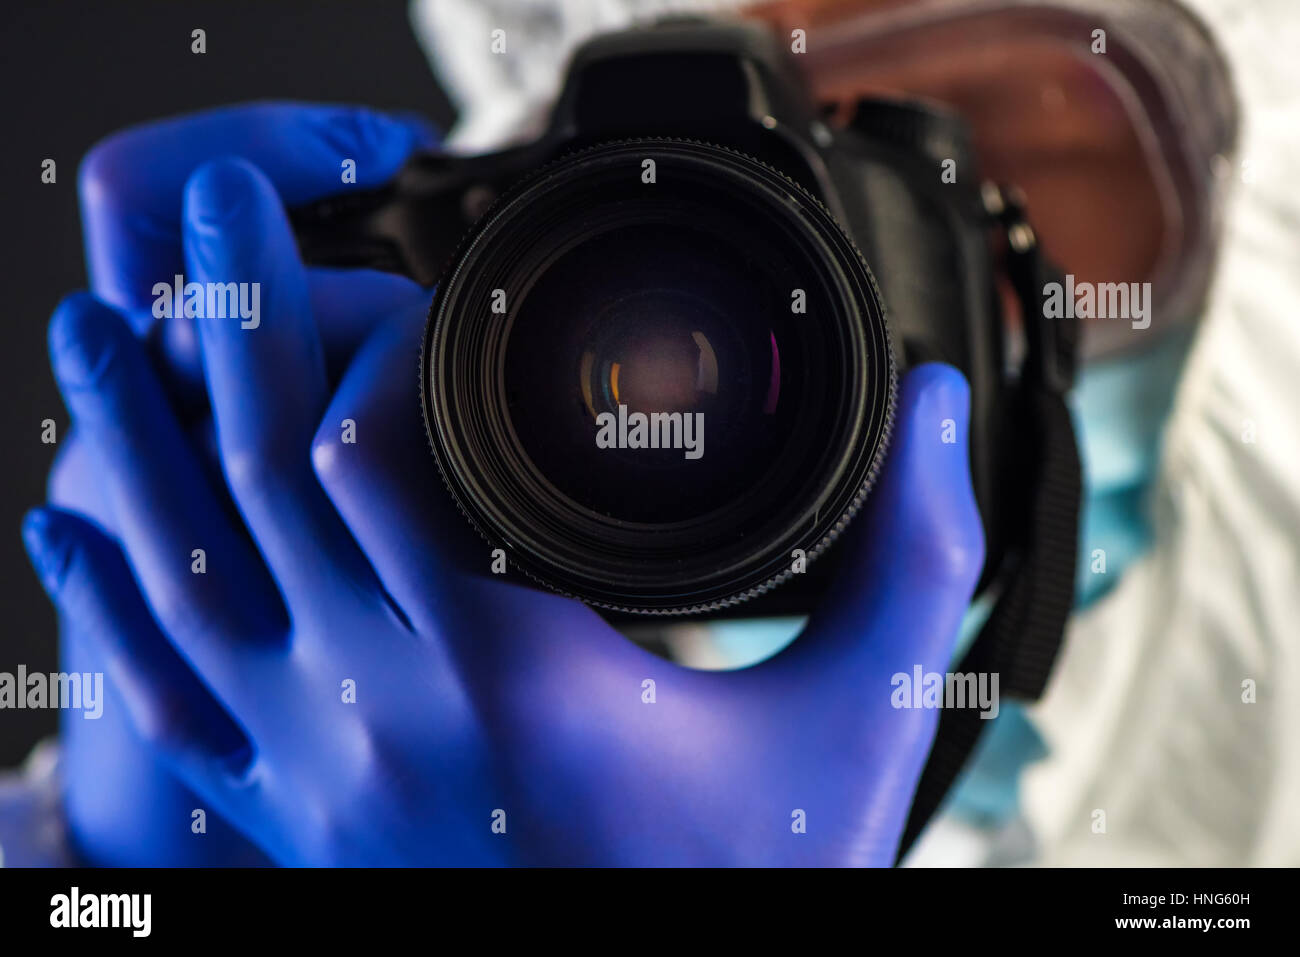 Crime scene forensics investigator with digital camera taking pictures as evidence for the investigation Stock Photo